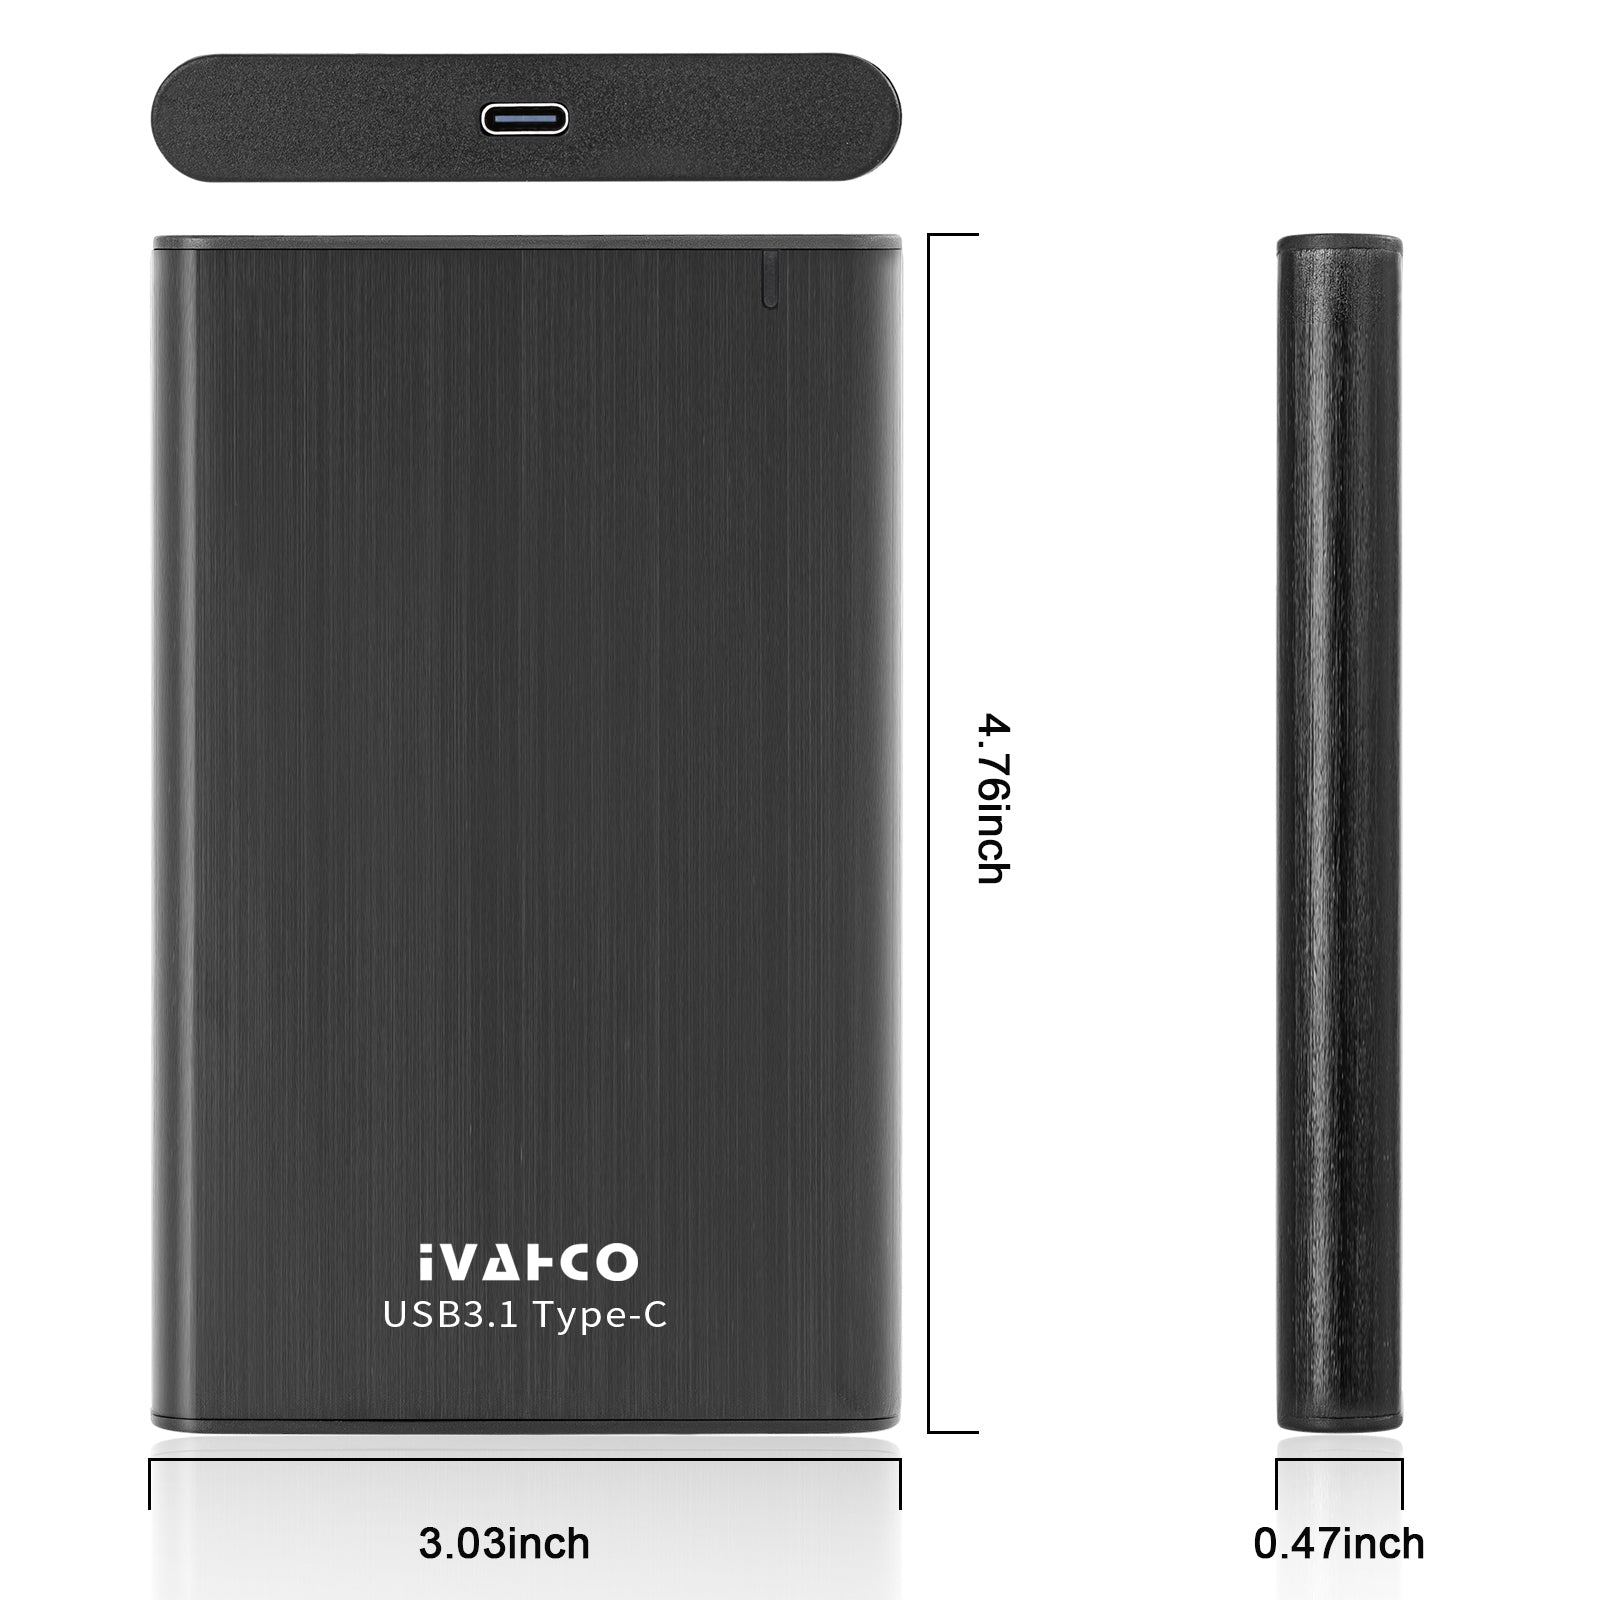 IVAHCO 320GB Type-C USB3.1 Solid State Drive Enclosure Brushed Metal 2.5" HDD External Case - Red